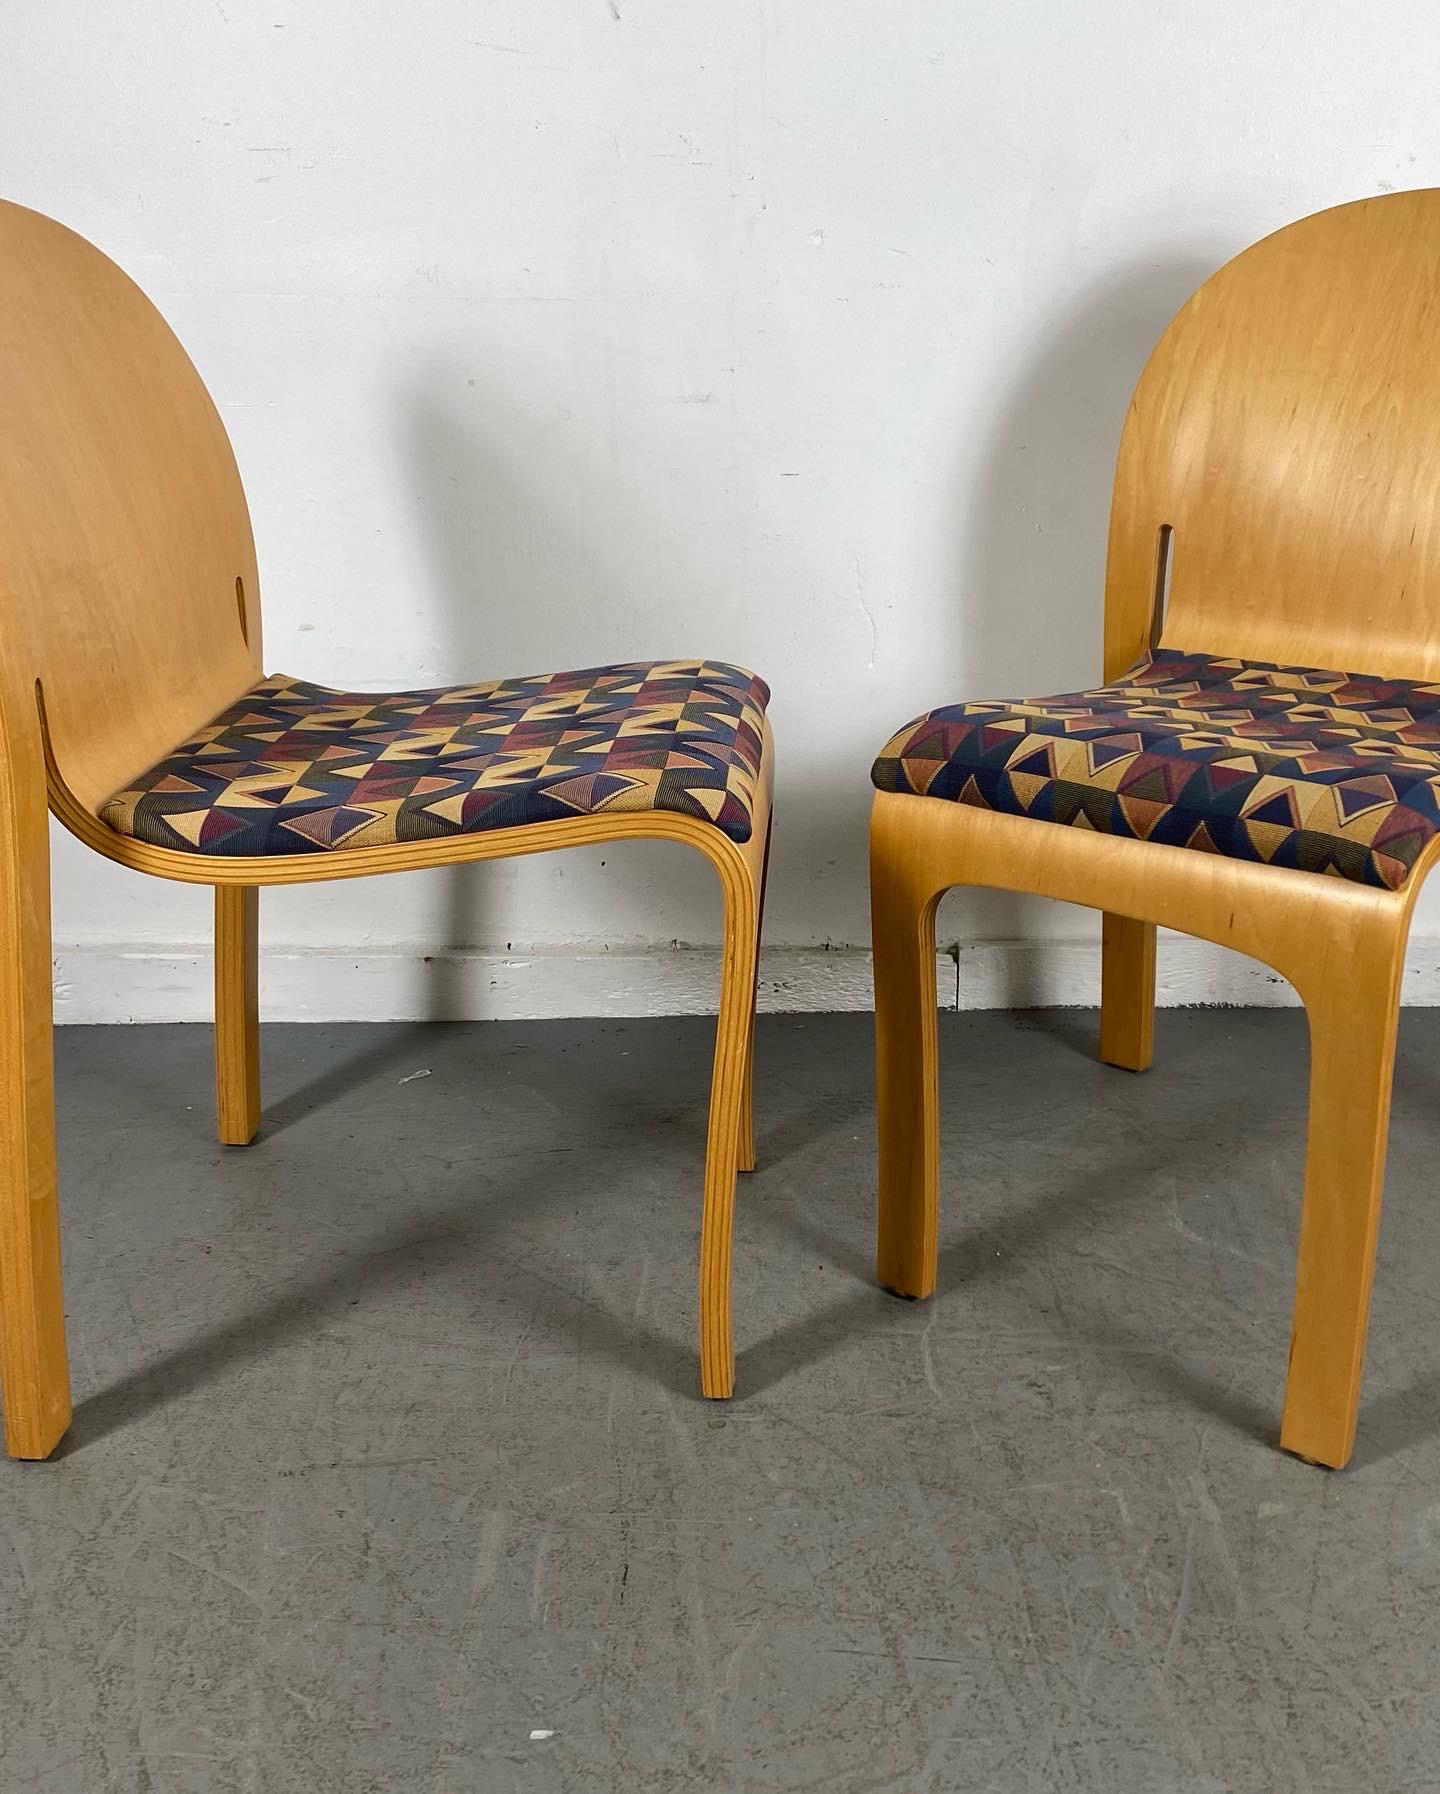 American Classic Bent Plywood Side Chairs Body Form by Peter Danko